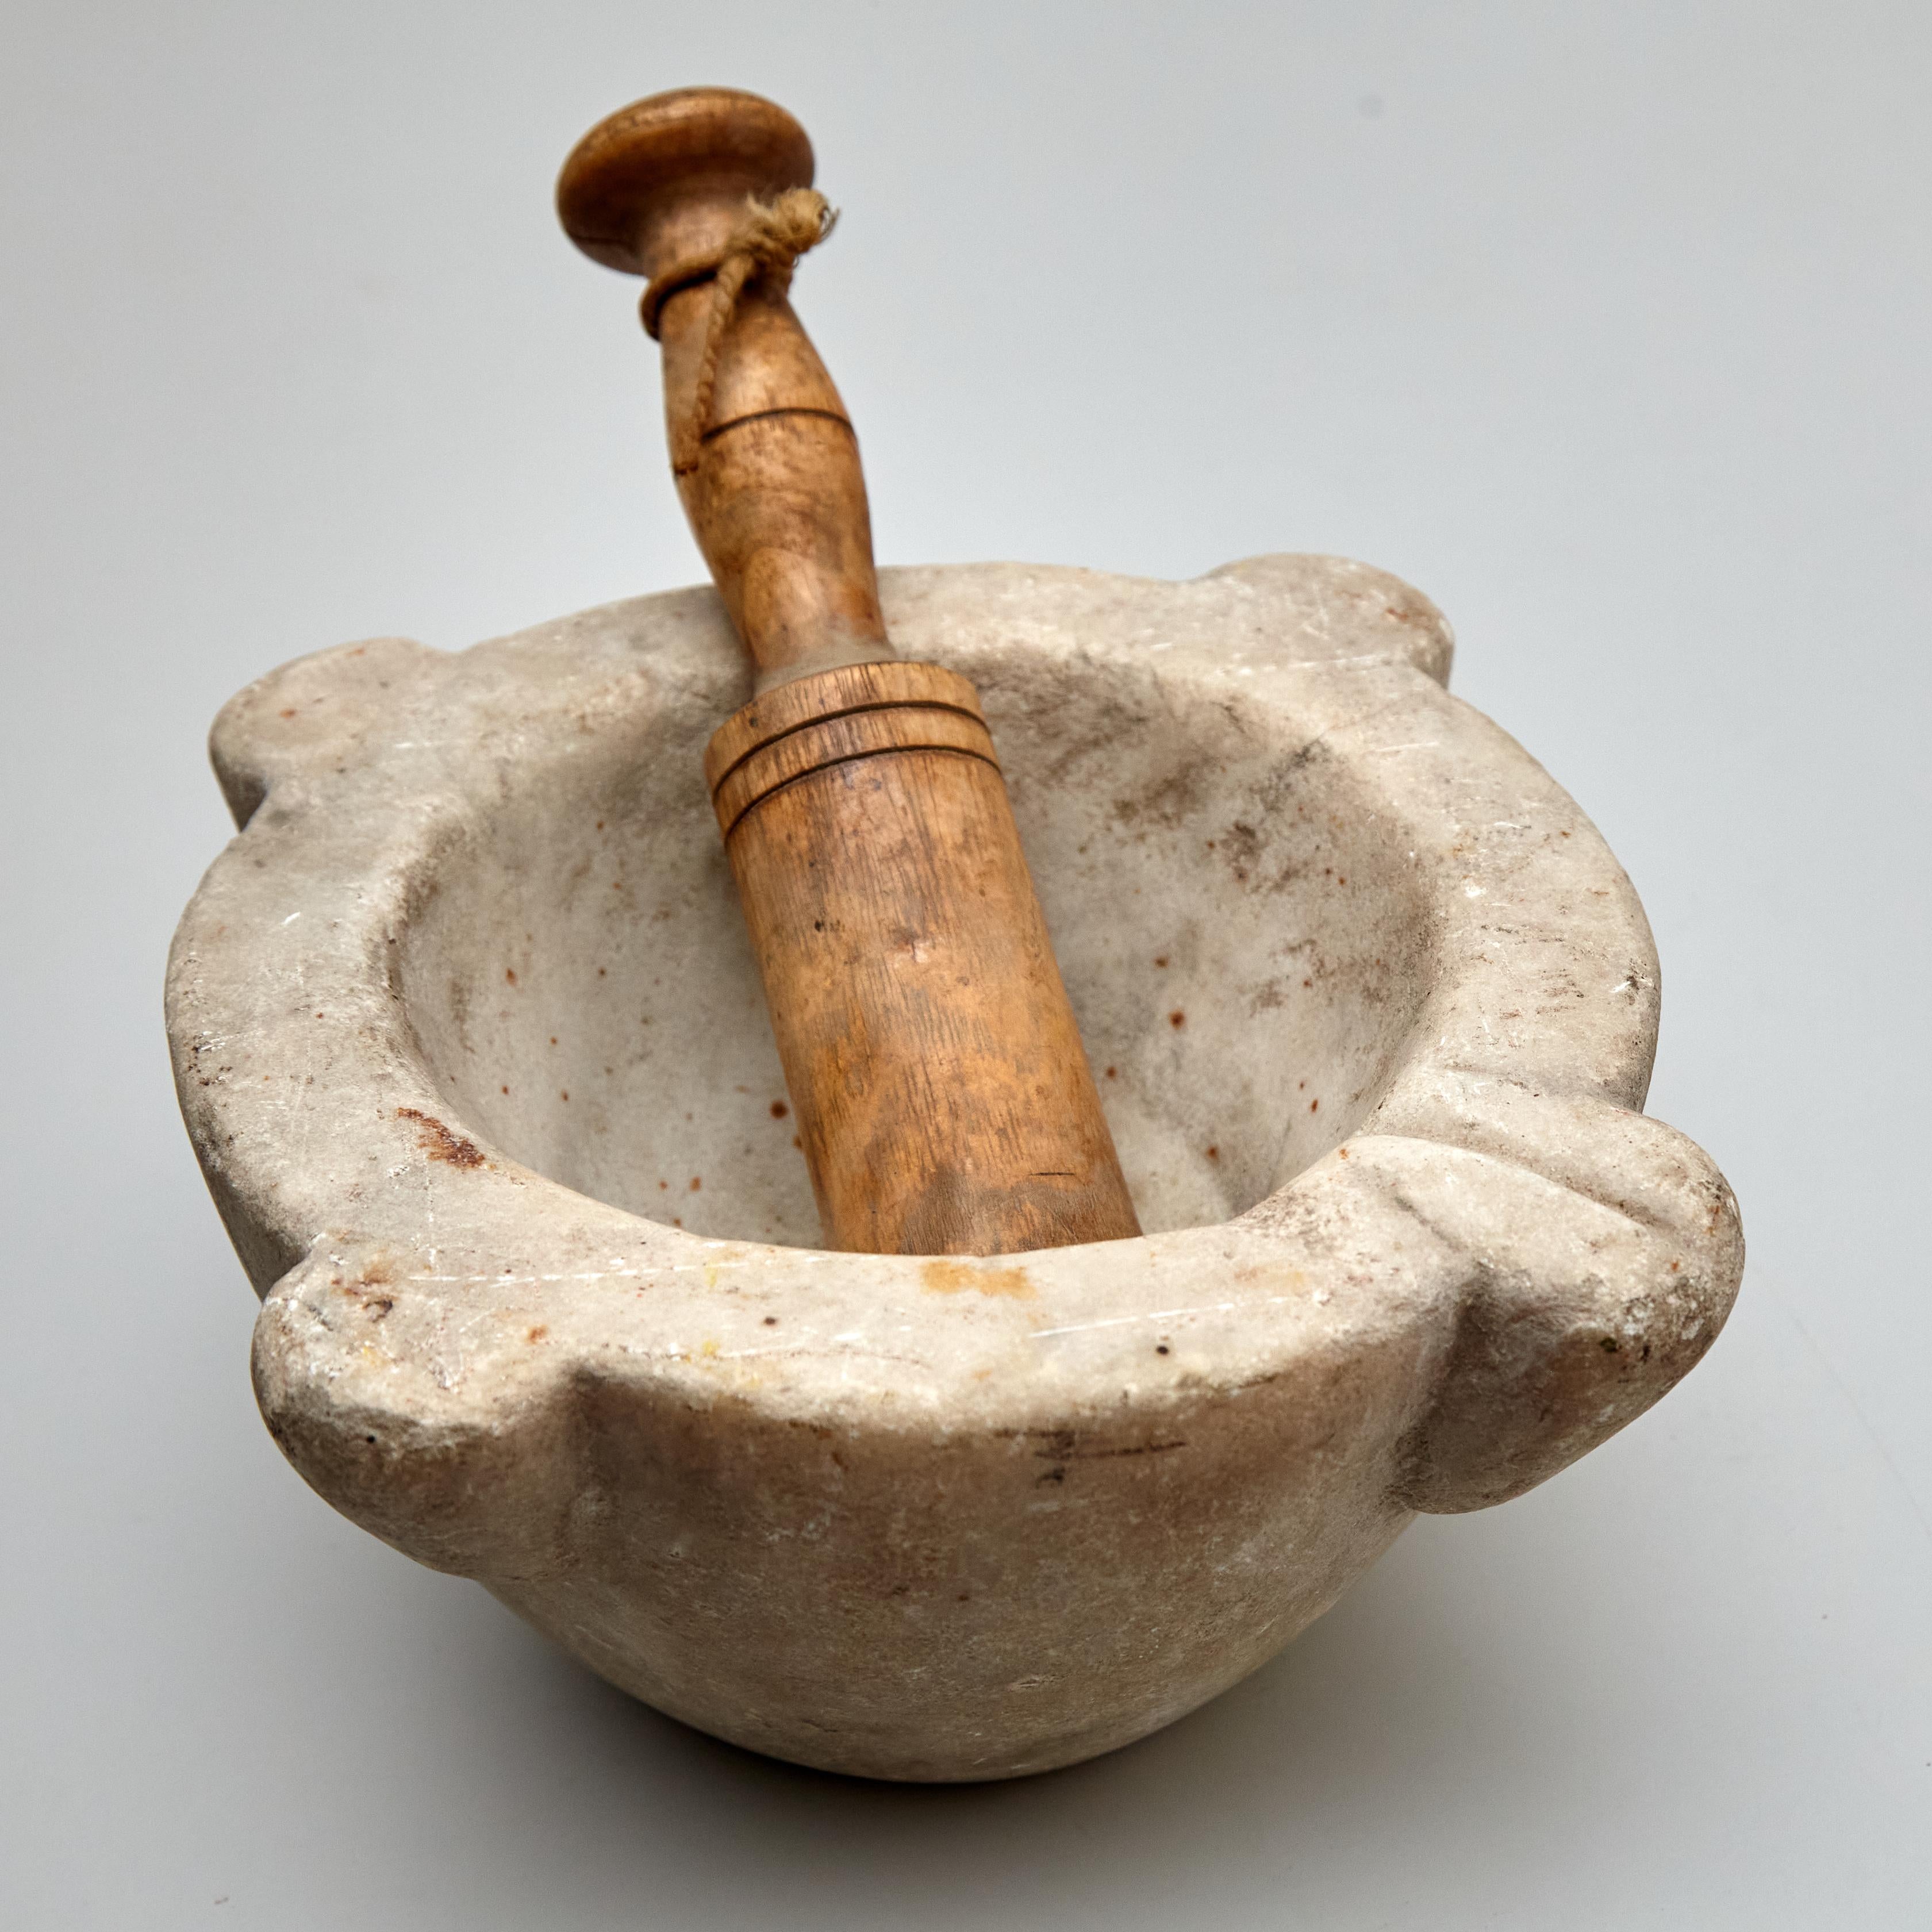 Introducing a genuine piece of history with this Traditional Early XXth century Spanish Mortar, circa 1940. Manufactured in Spain, this charming mortar is crafted from stone and wood, showcasing the beauty of Classic Spanish craftsmanship. In